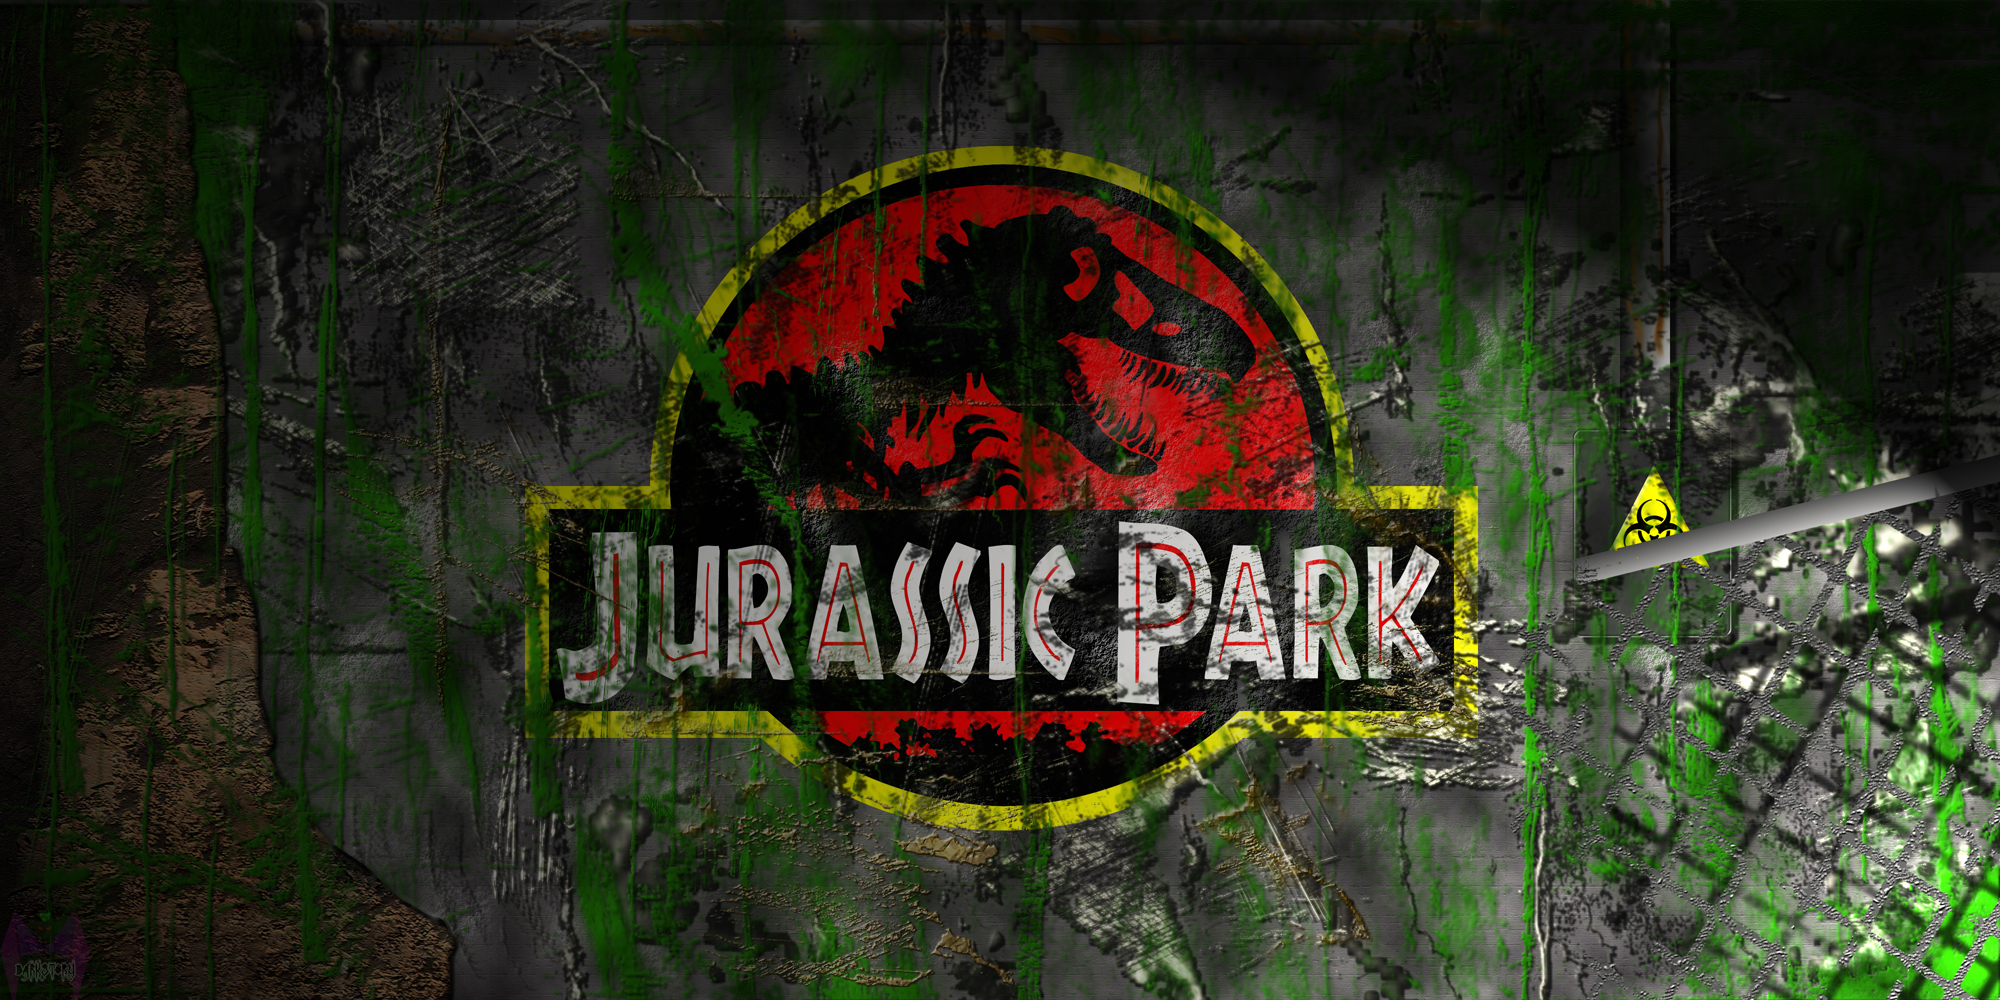 Jurassic Park for mac download free